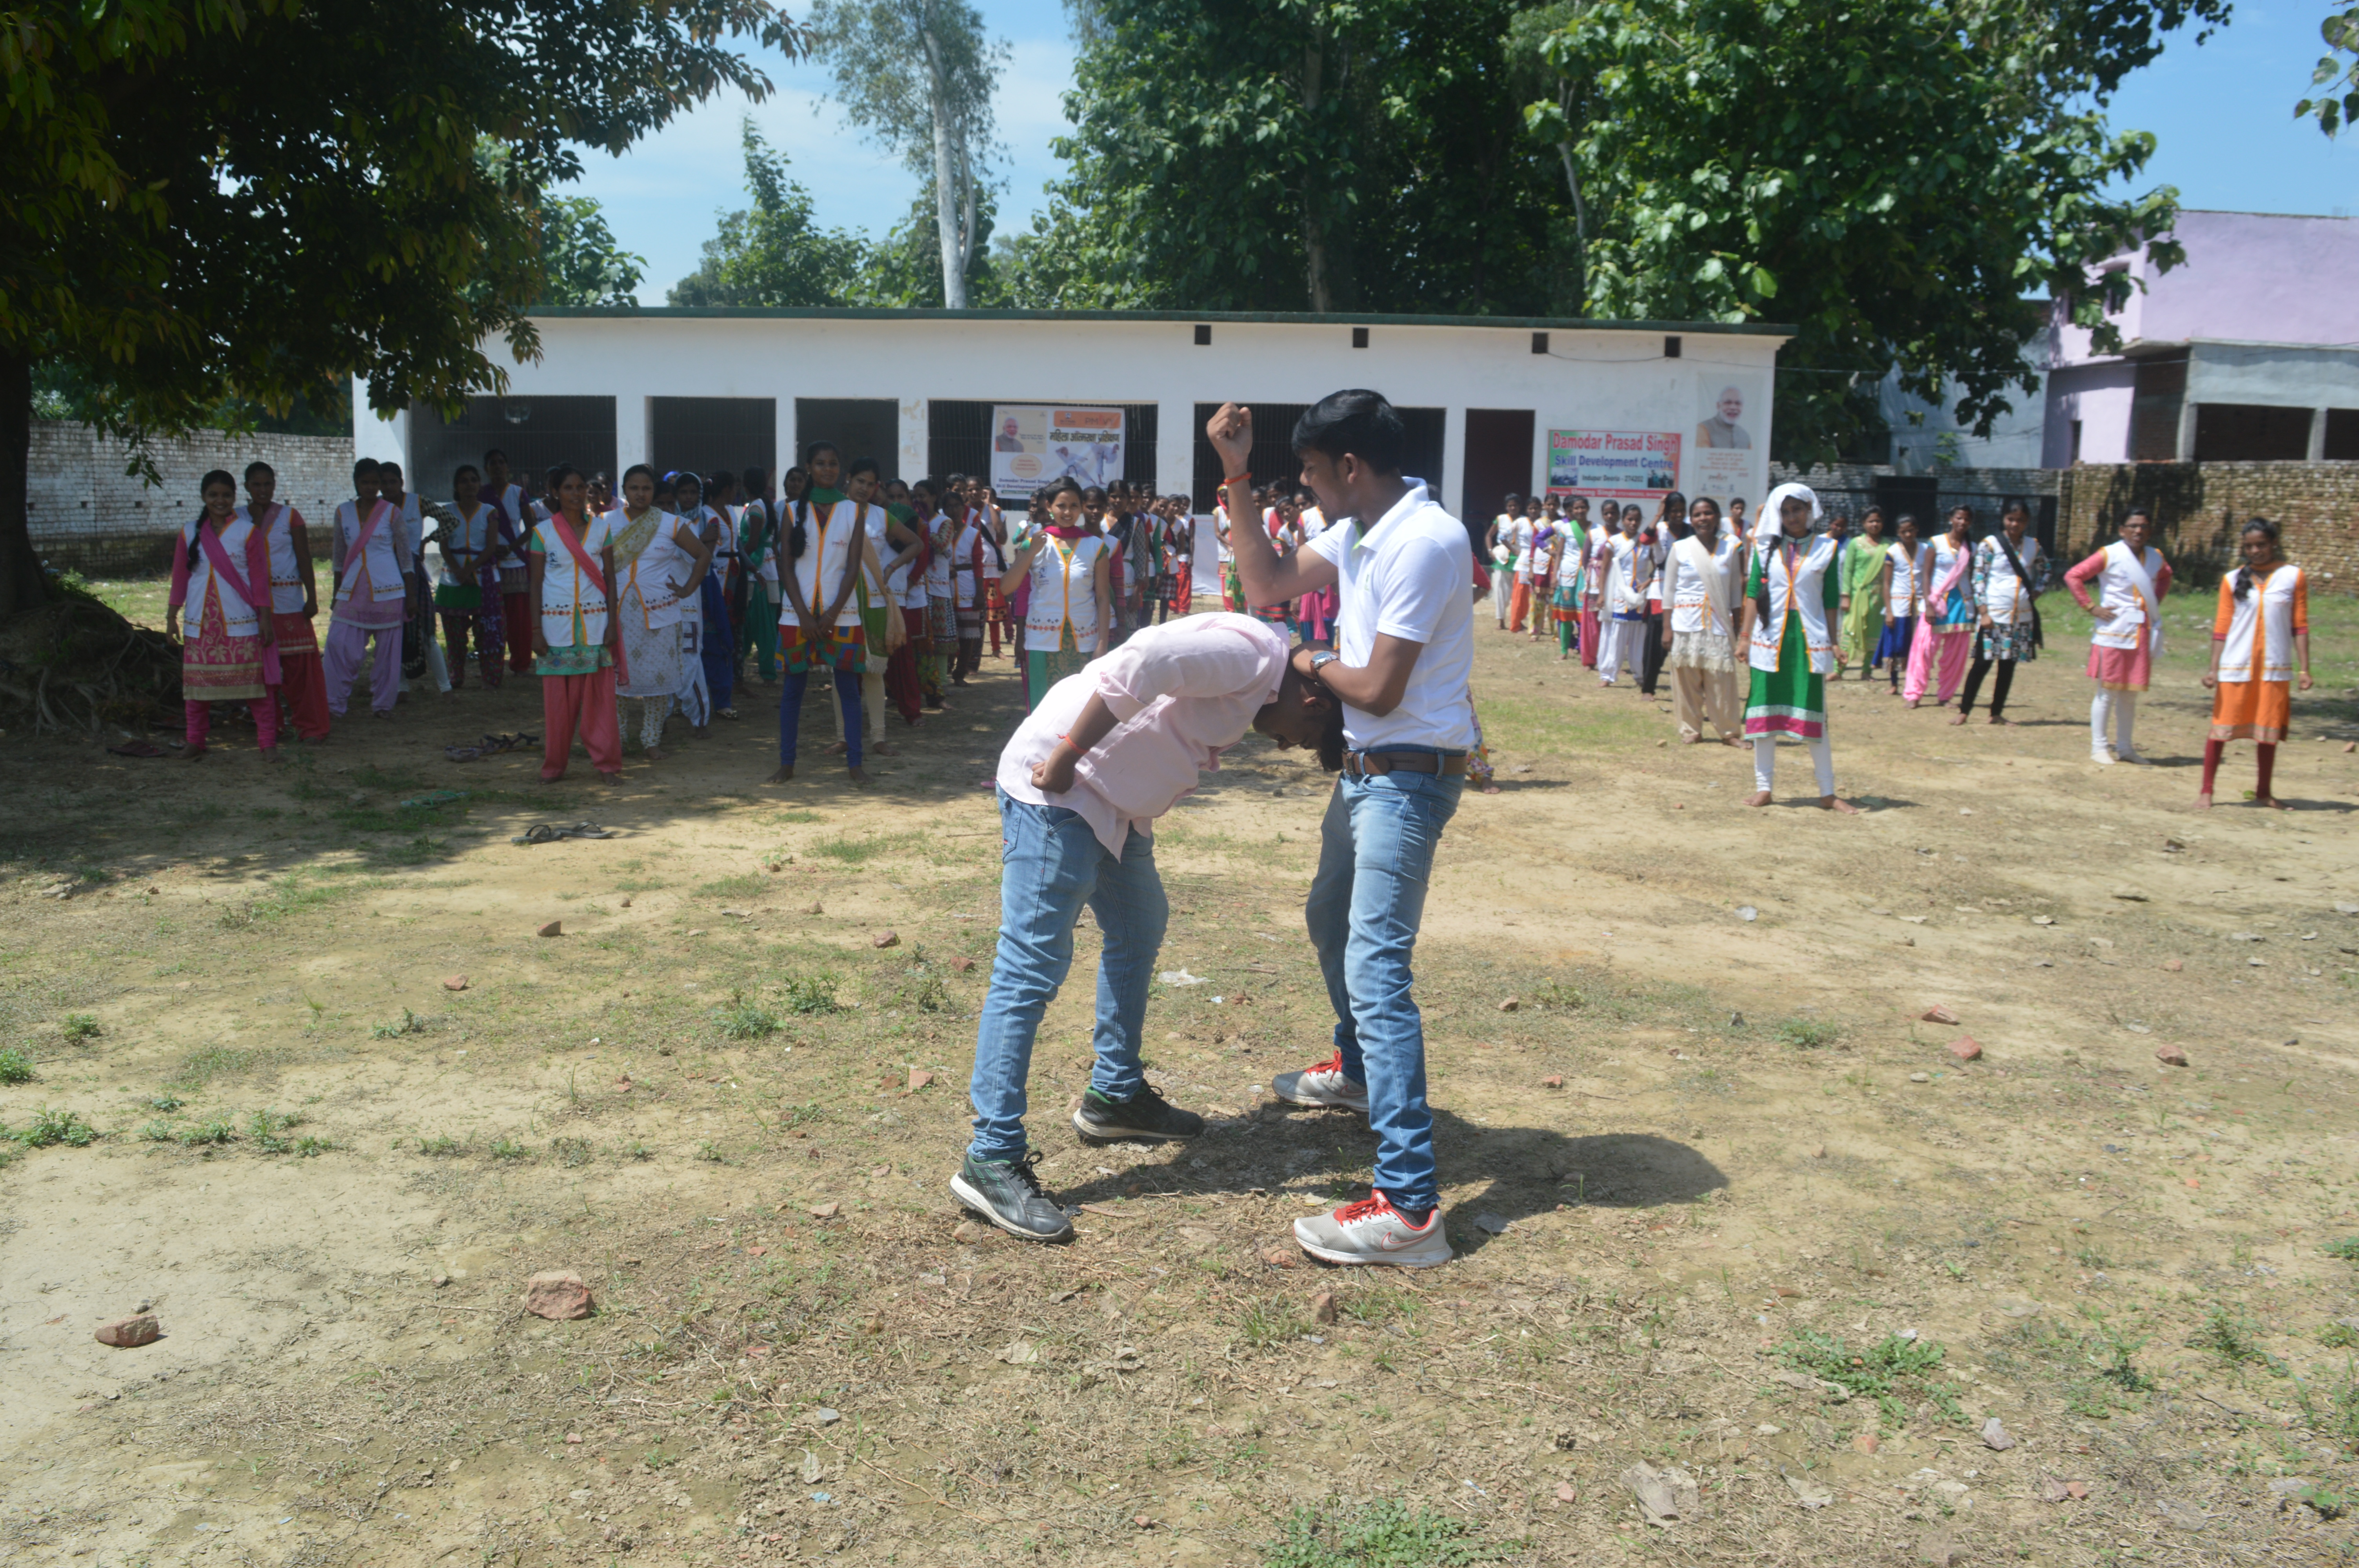 SUNAINA SAMRIDDHI FOUNDATION providing Self Defense Training for GIRL TRAINEES Under #PMKVY Along with trade related training, Aim of Training is to equip the Girl Trainees with useful strategies to defend themselves from spontaneous or pre-mediated violence or any untoward situation. and also help them in increasing their physical fitness RAJIV PARTAP SINGH RUDY Rajiv Pratap Rudy NSDC National Skill Development Corporation Skill India Logistics Sector Skill Council Electronics Sector Skills Council of India Ministry of Skill Development and Entrepreneurship Ministry of Skill Development and Entrepreneurship PMKVY - Pradhan Mantri Kaushal Vikas Yojna #PMKVY #NSDC #Skillindia #MSDE #sunaina #SelfDefenseforGirl #EmpoweringWomen